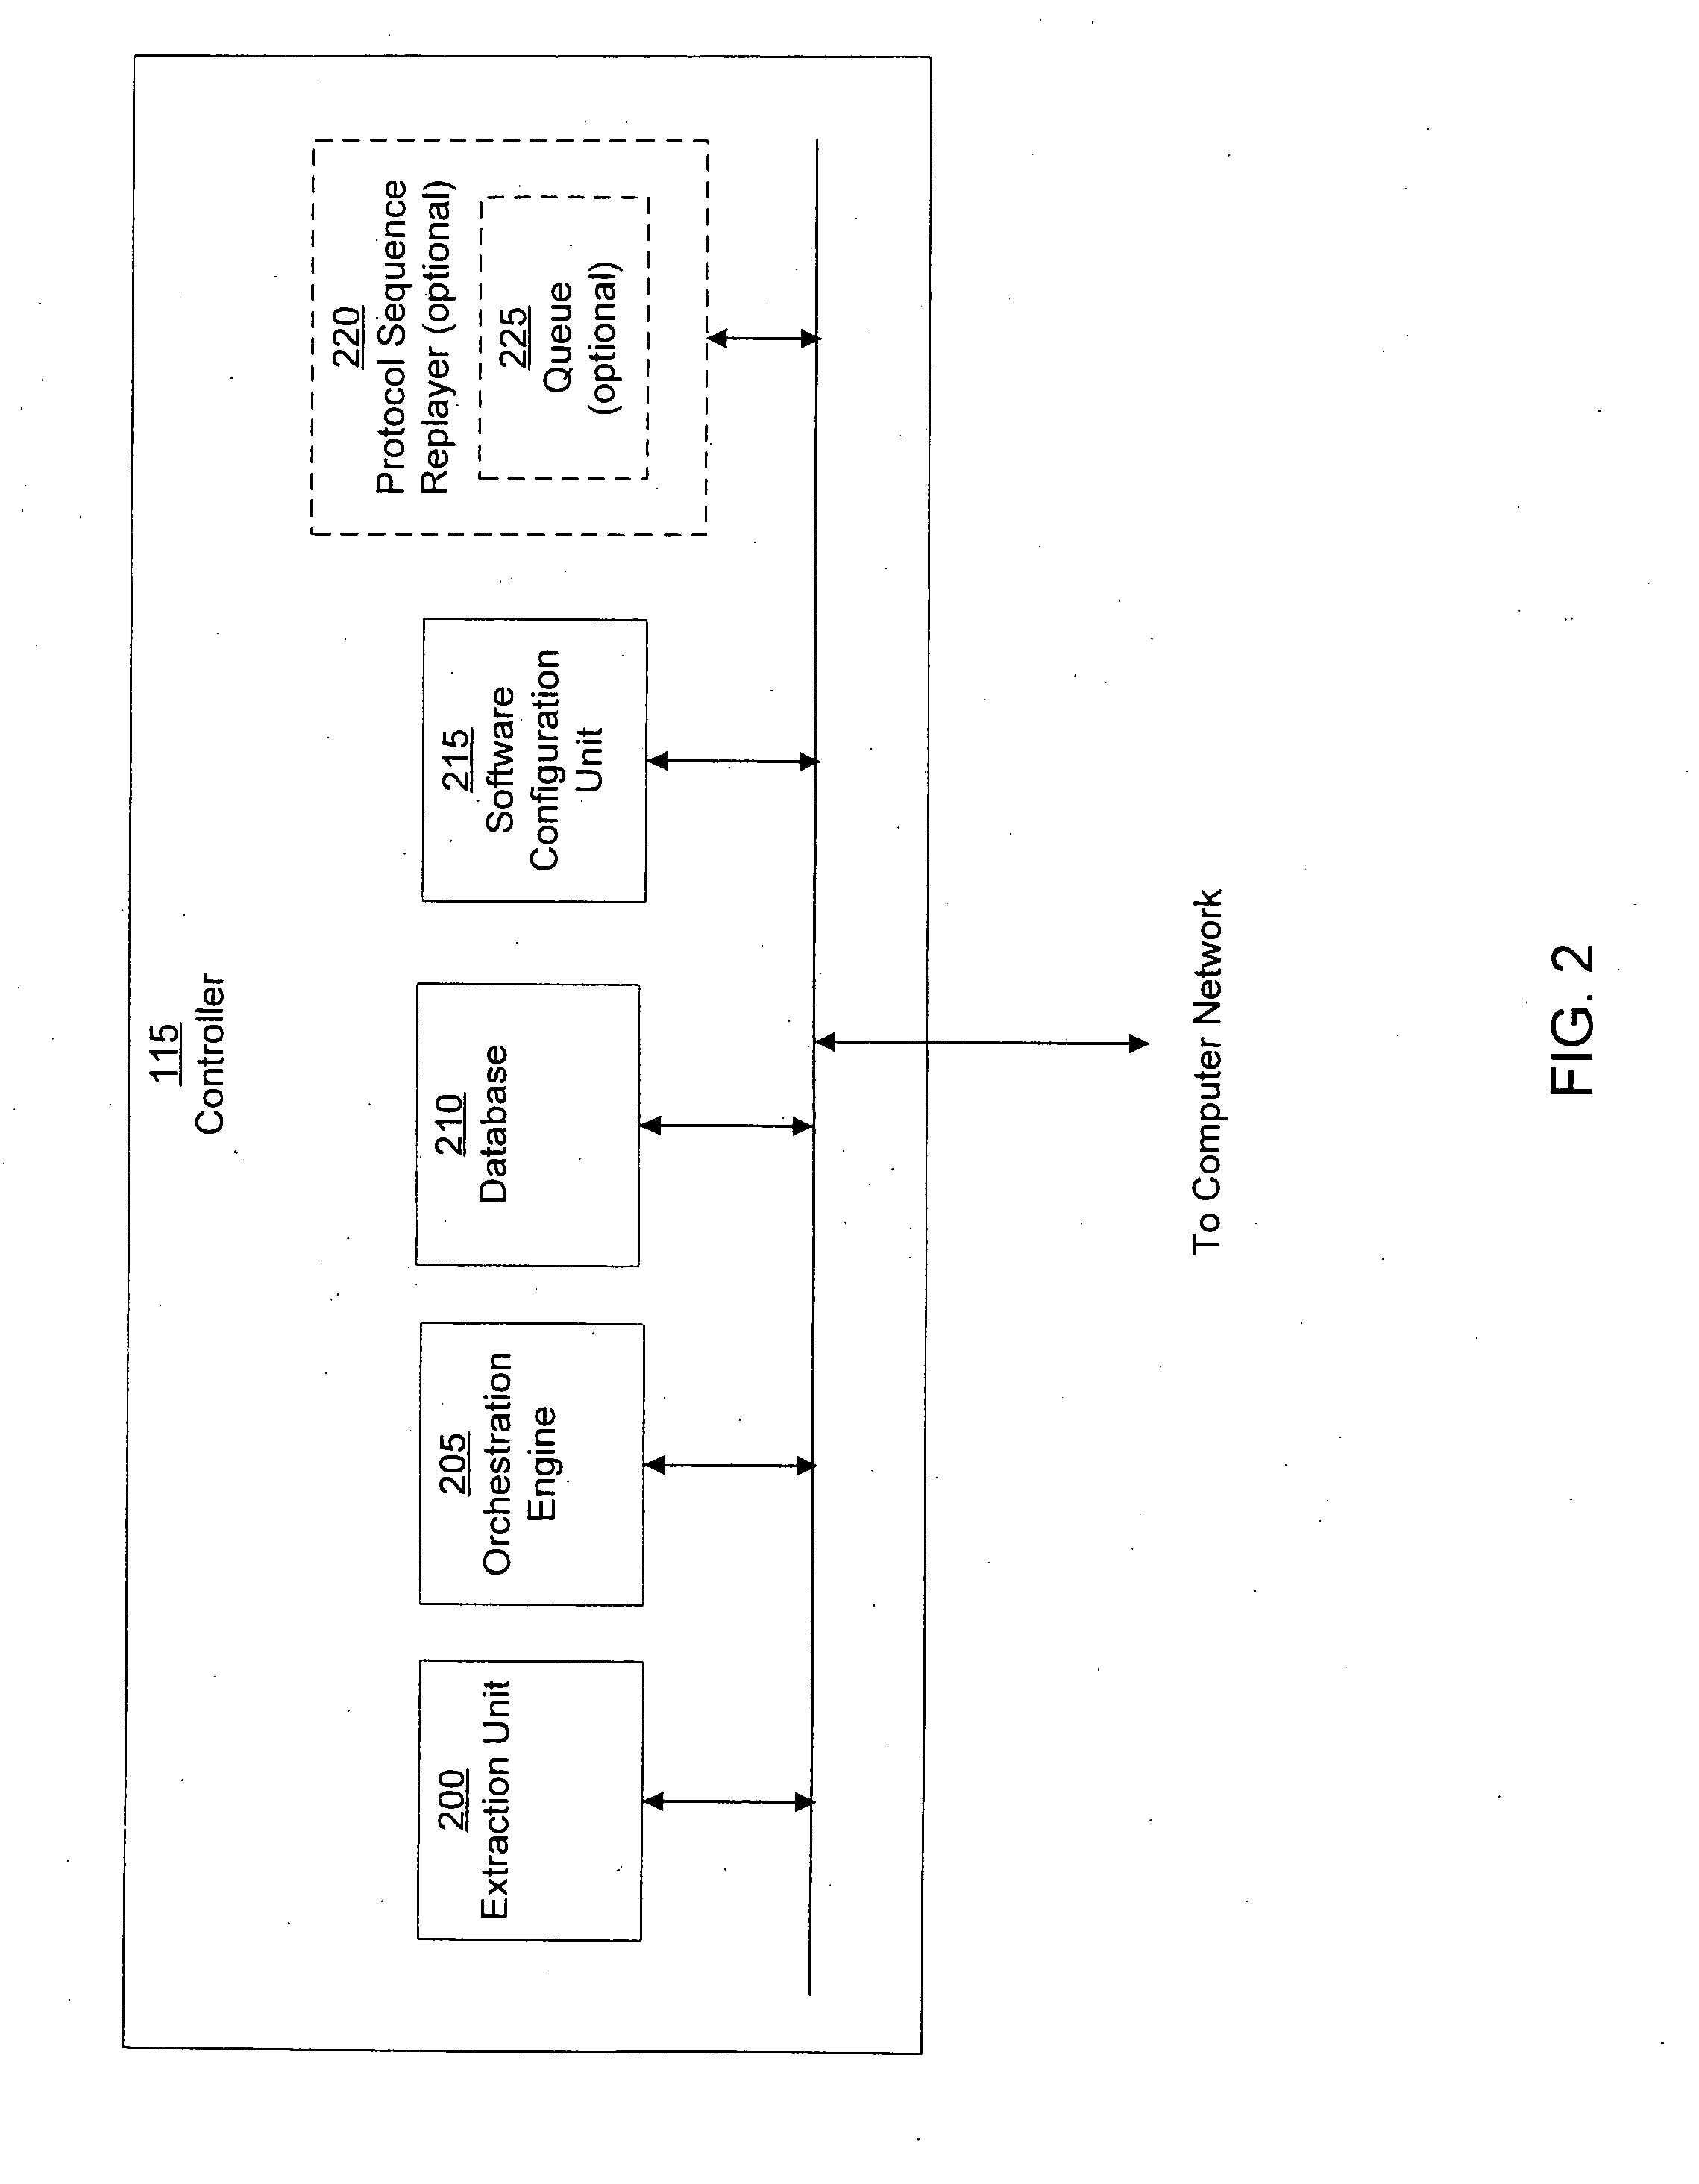 System and method of containing computer worms